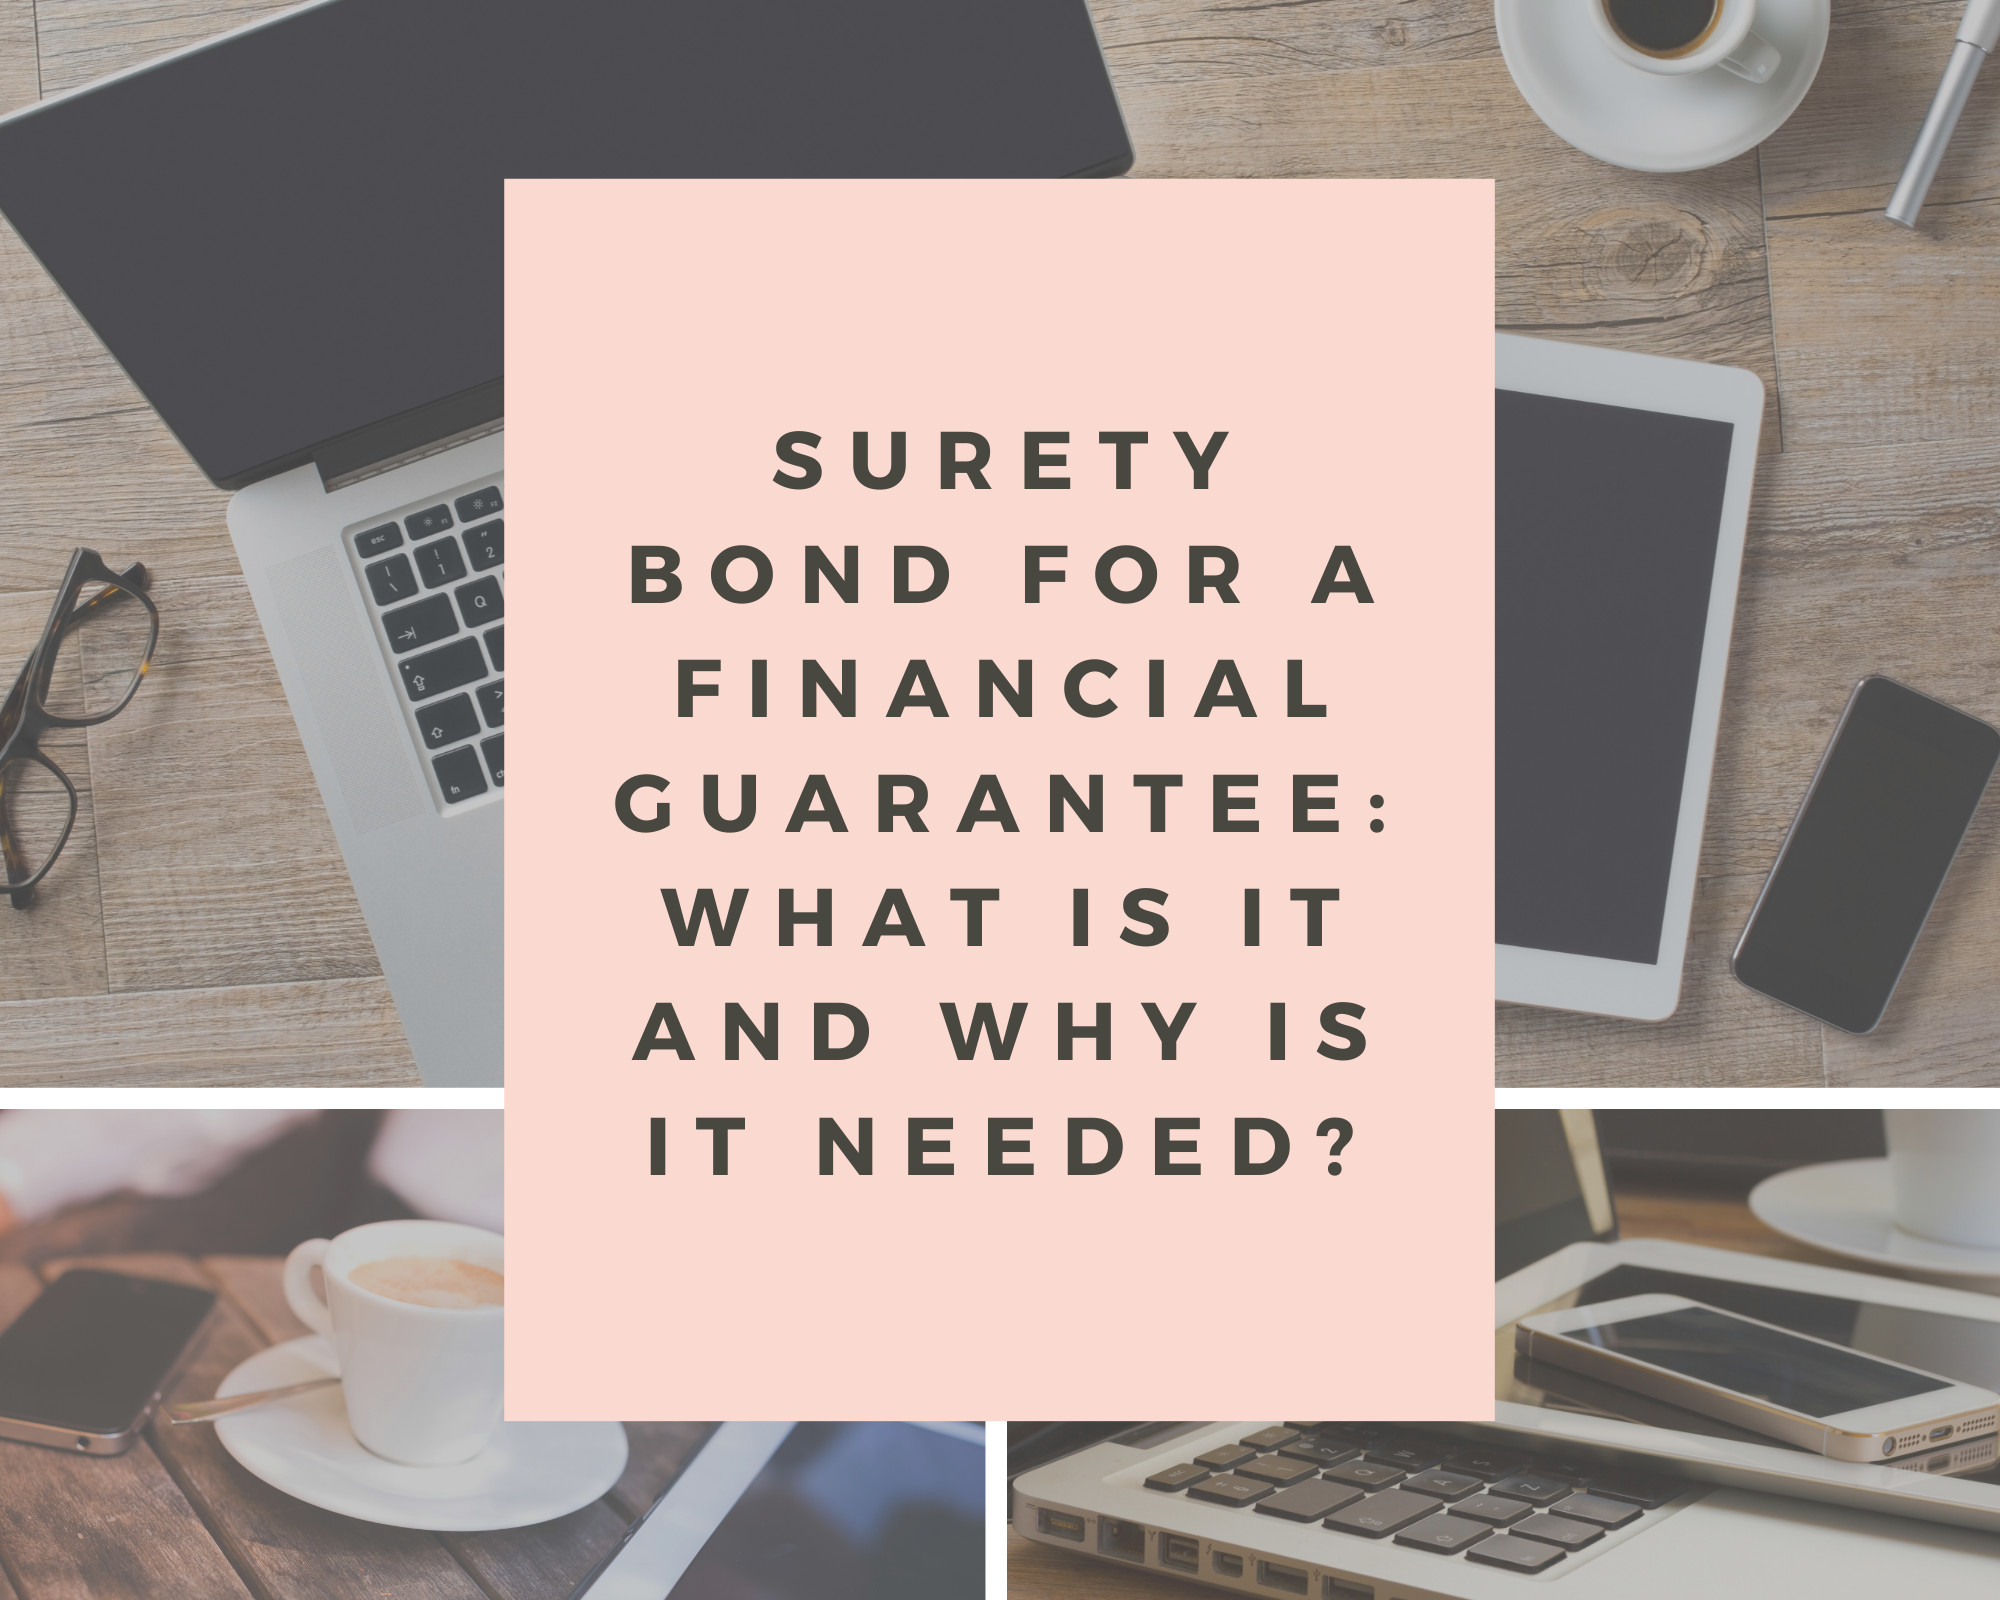 surety bond - what is the purpose of a surety bond - office set up with laptop and a cup of coffee